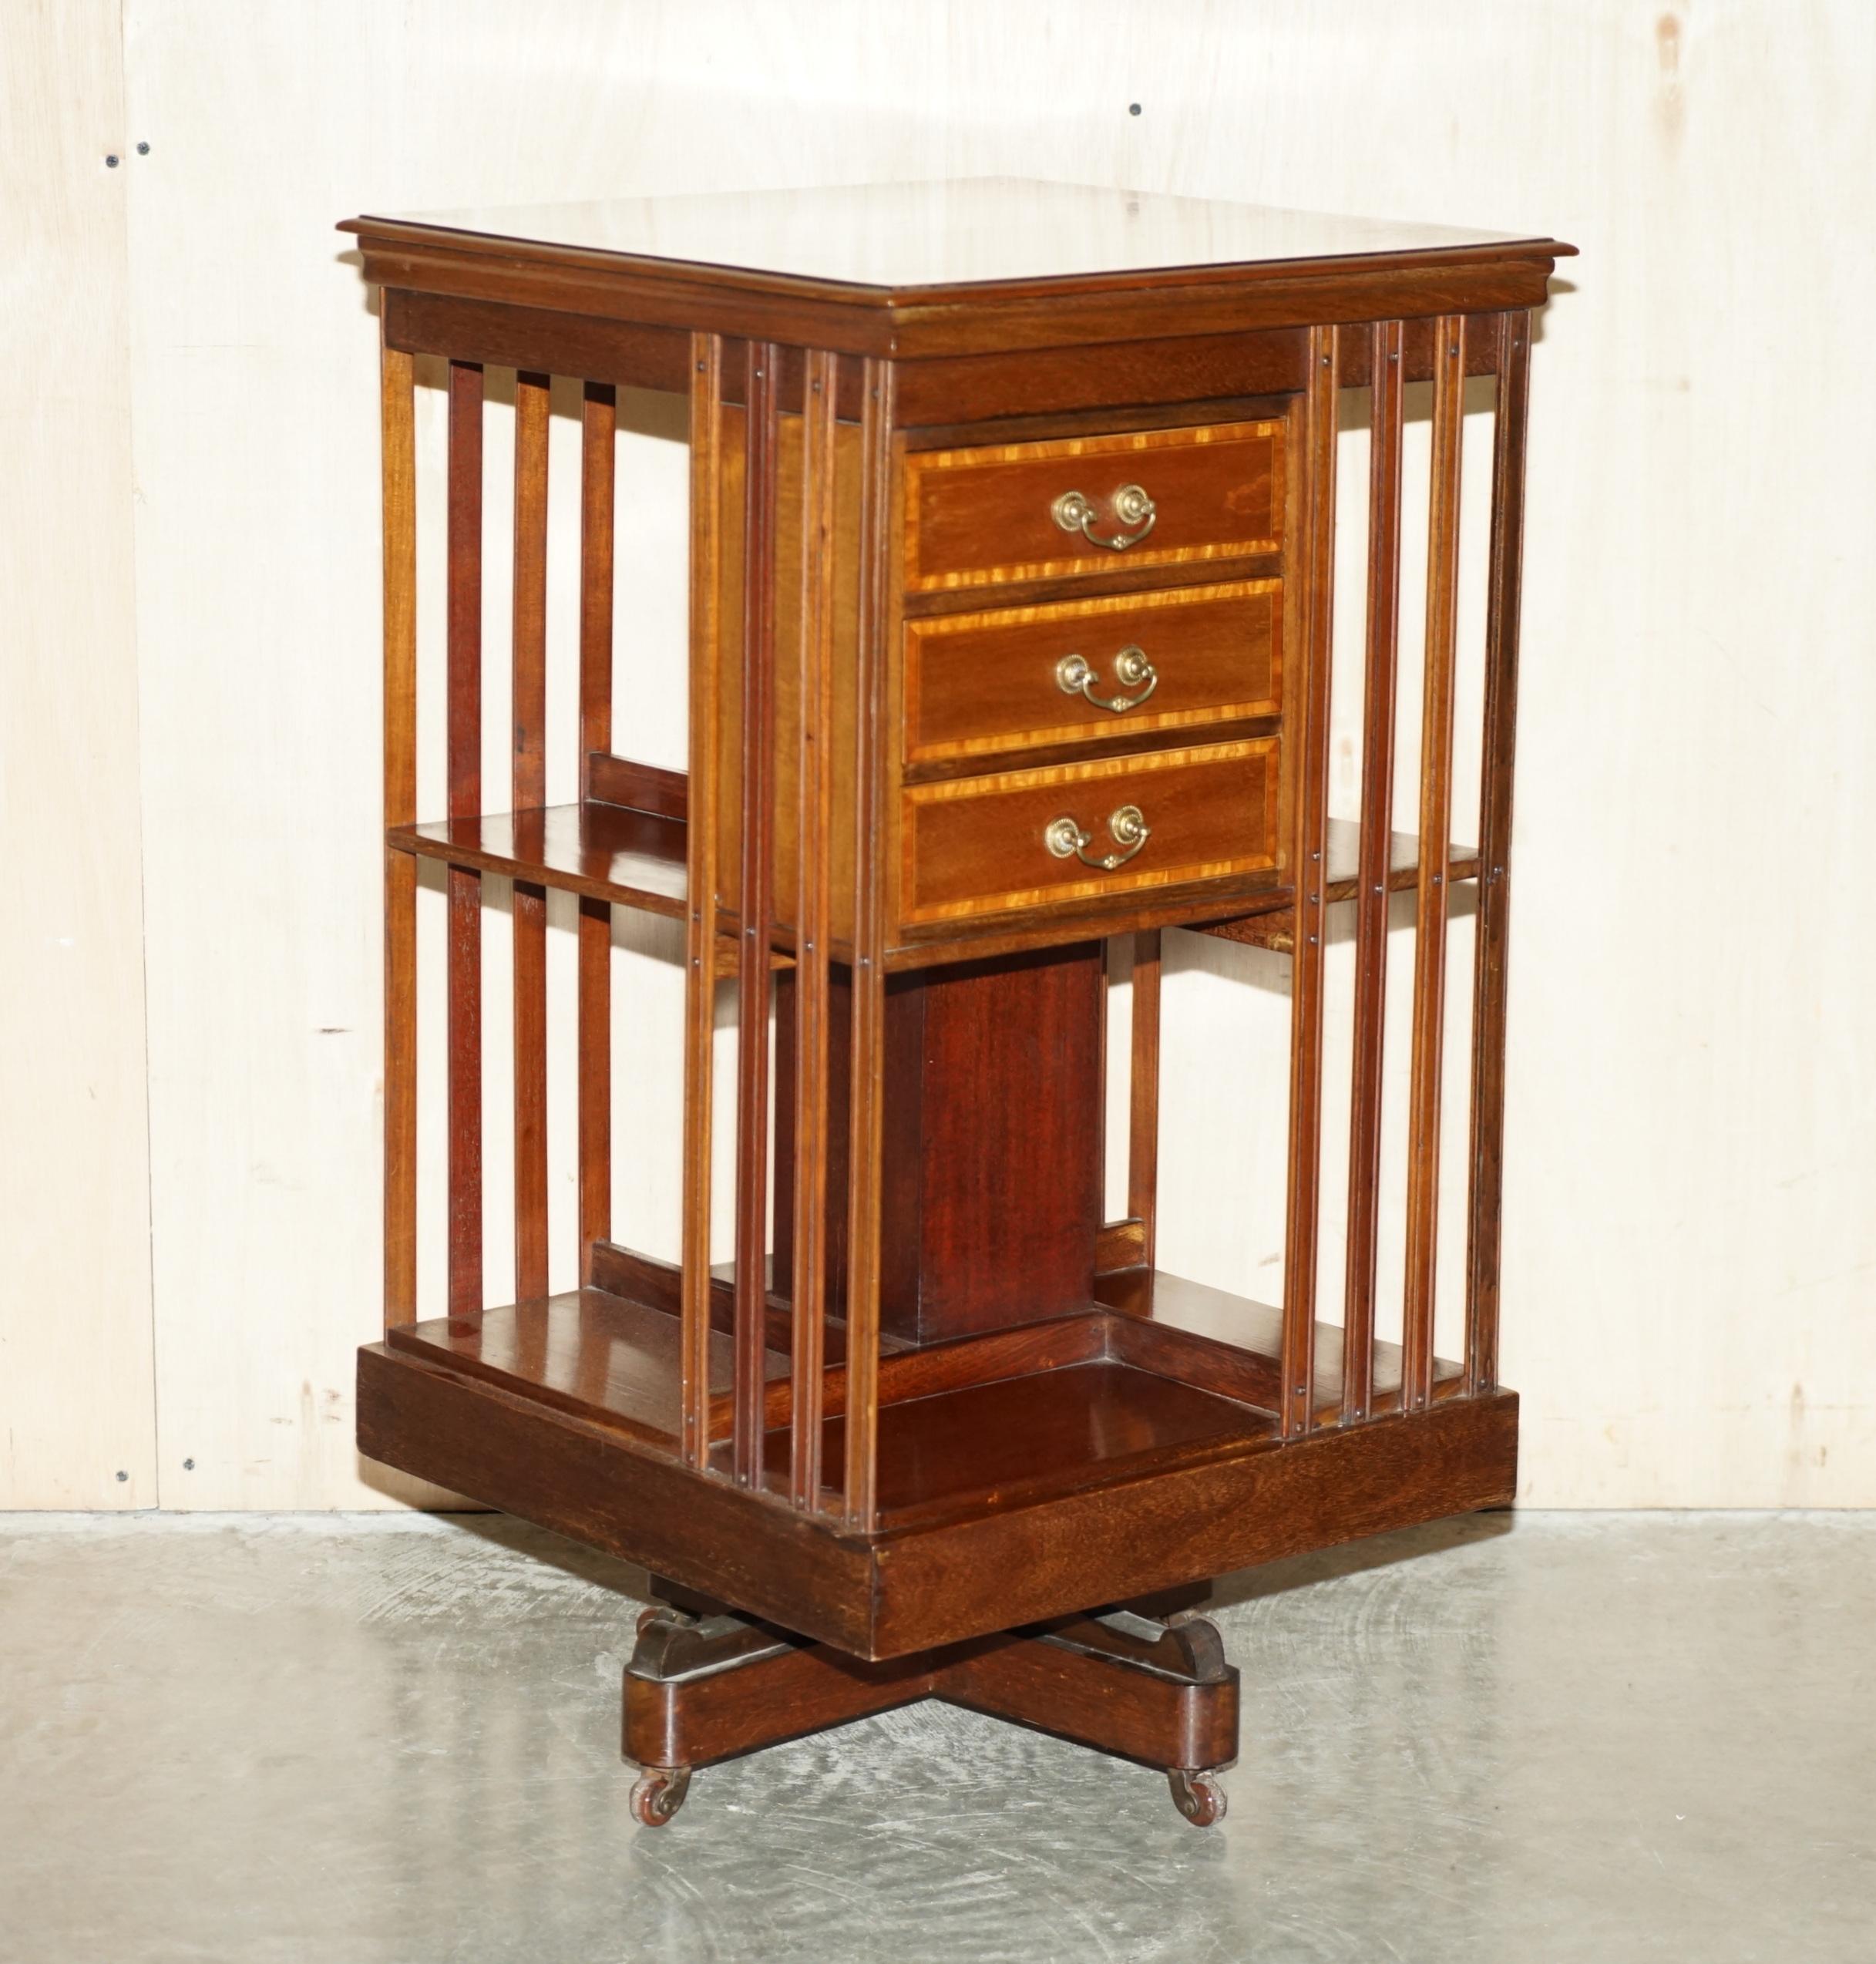 We are delighted to offer for sale this exhibition quality, fully restored, English Walnut with Satinwood inlay, circa 1880 revolving bookcase table with exquisitely finished top and very rare small drawer section 

A good looking and well made